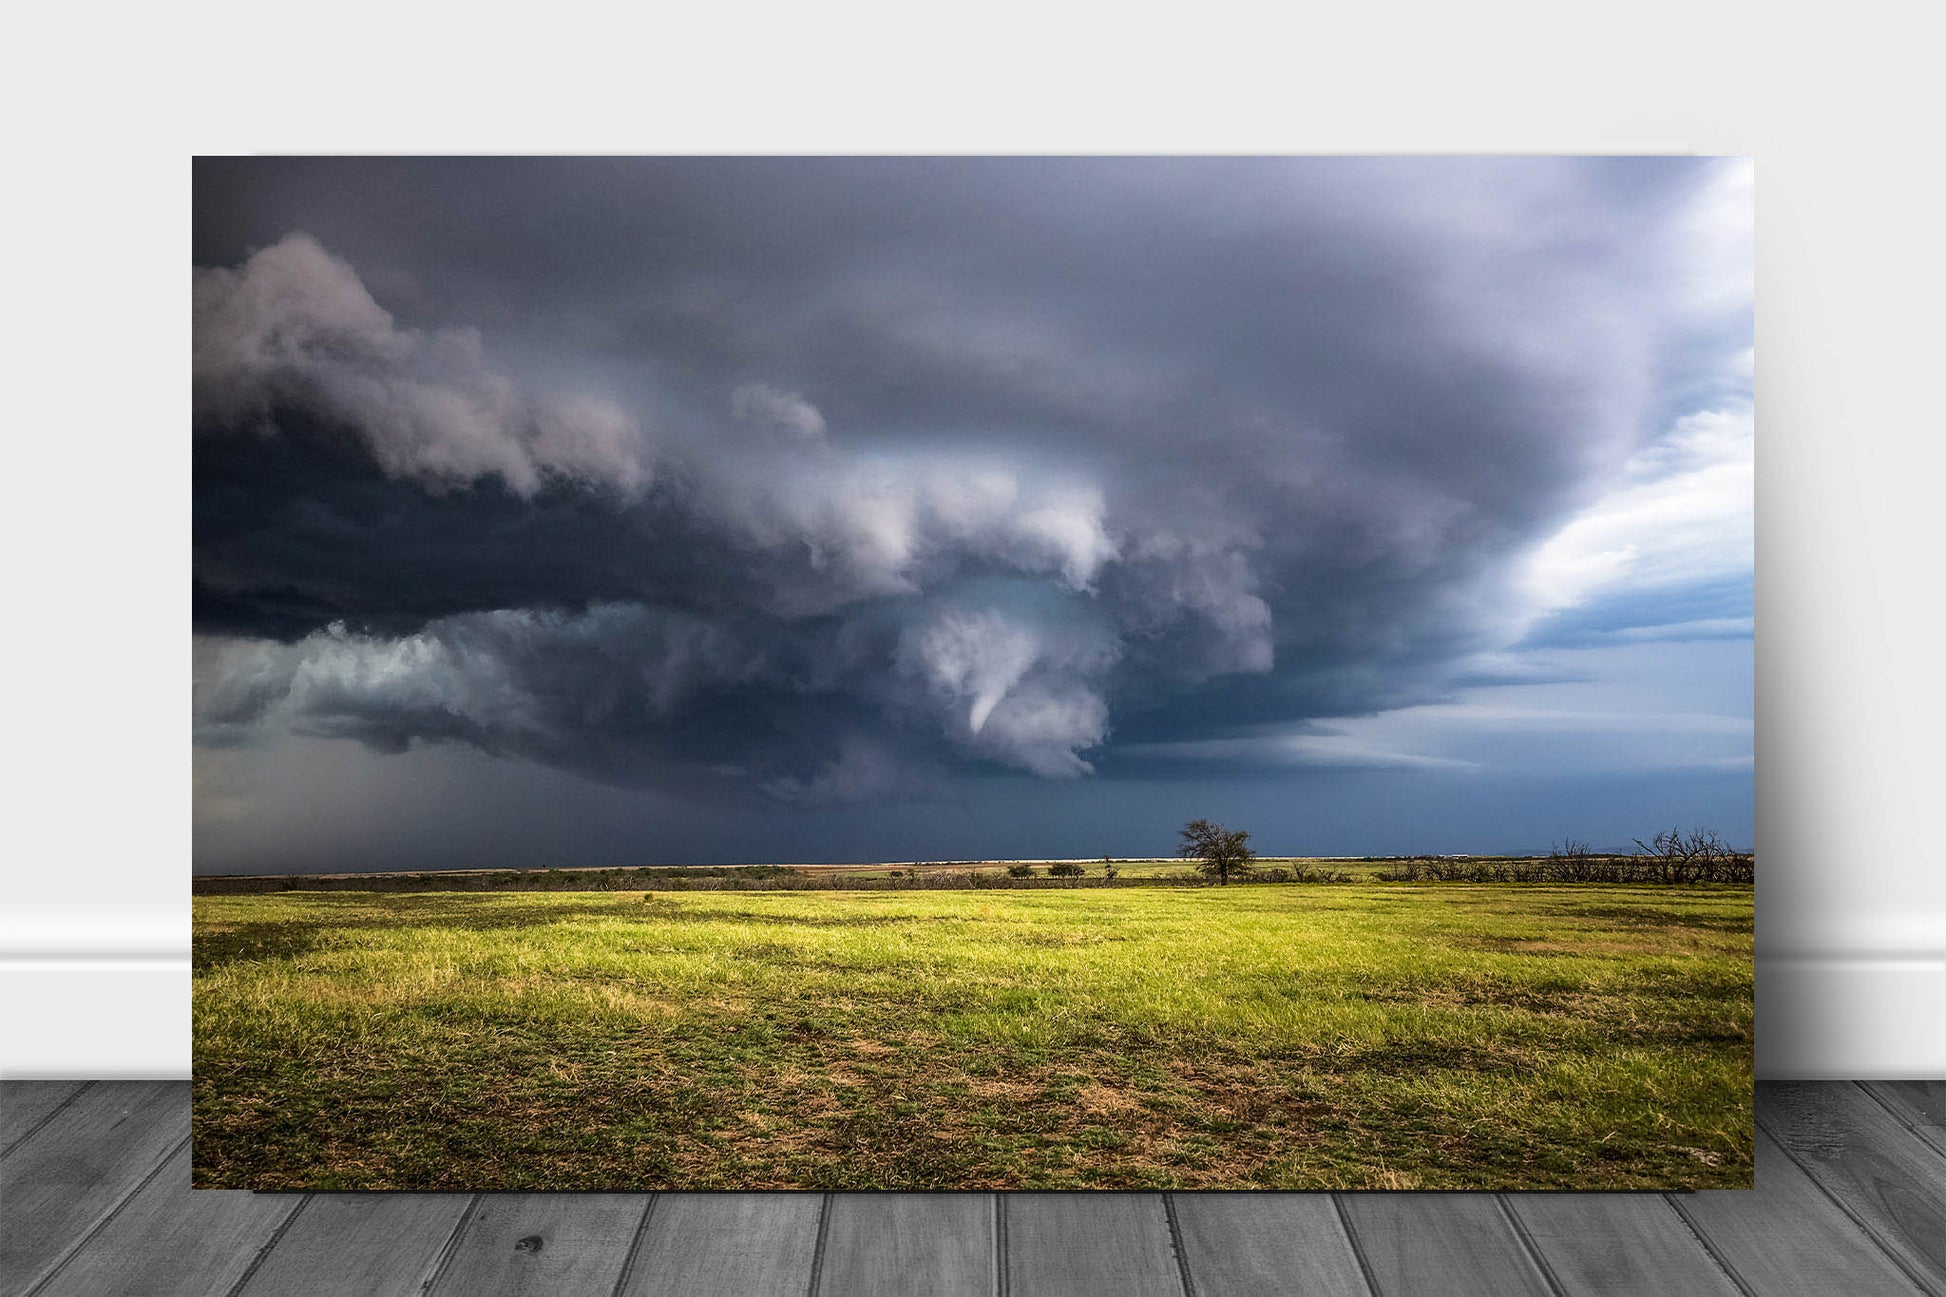 Storm metal print on aluminum of a thunderstorm wrapping up to produce a funnel cloud over an open field on a stormy autumn day in Oklahoma by Sean Ramsey of Southern Plains Photography.